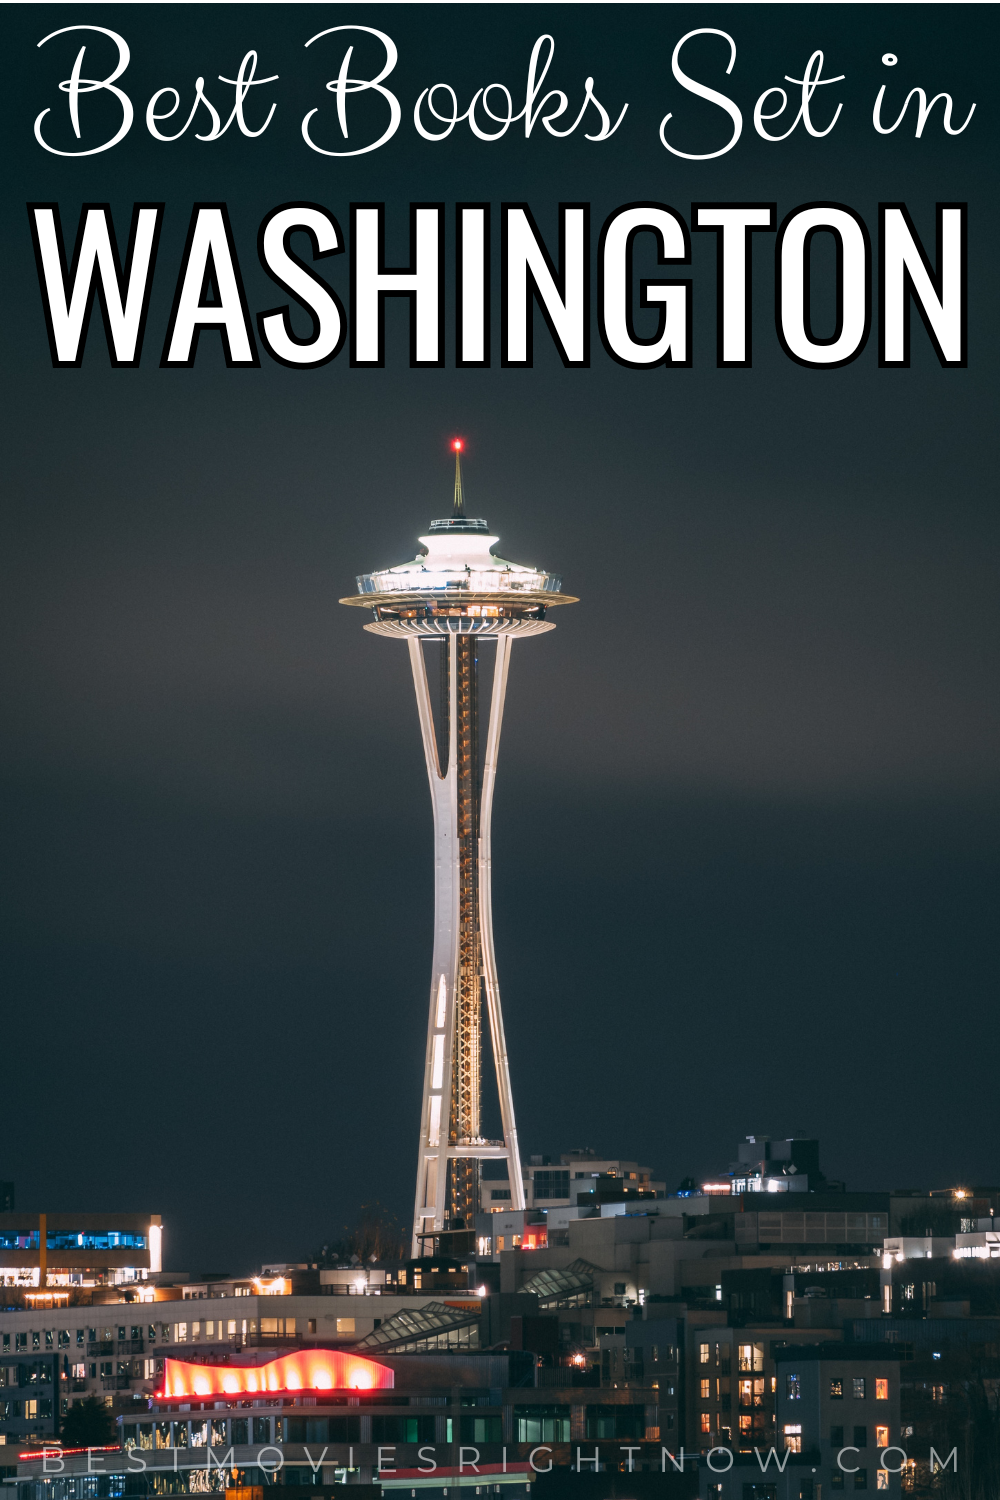 Photo of The Space Needle Observation Tower in Seattle, Washington with text 